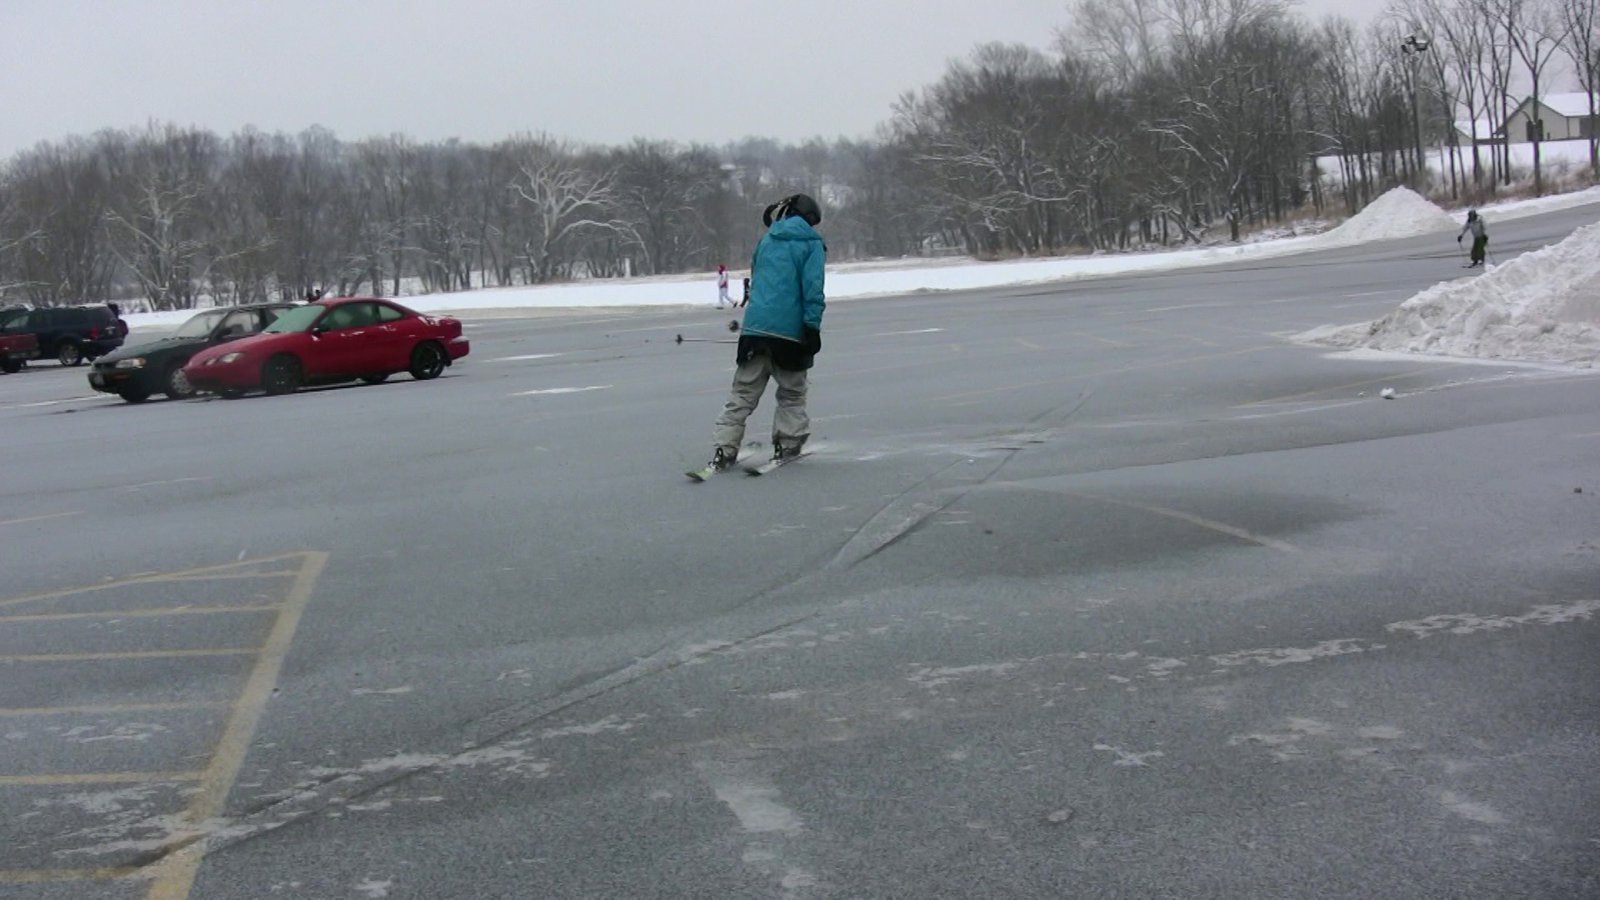 Video still: skiing in the parking lot